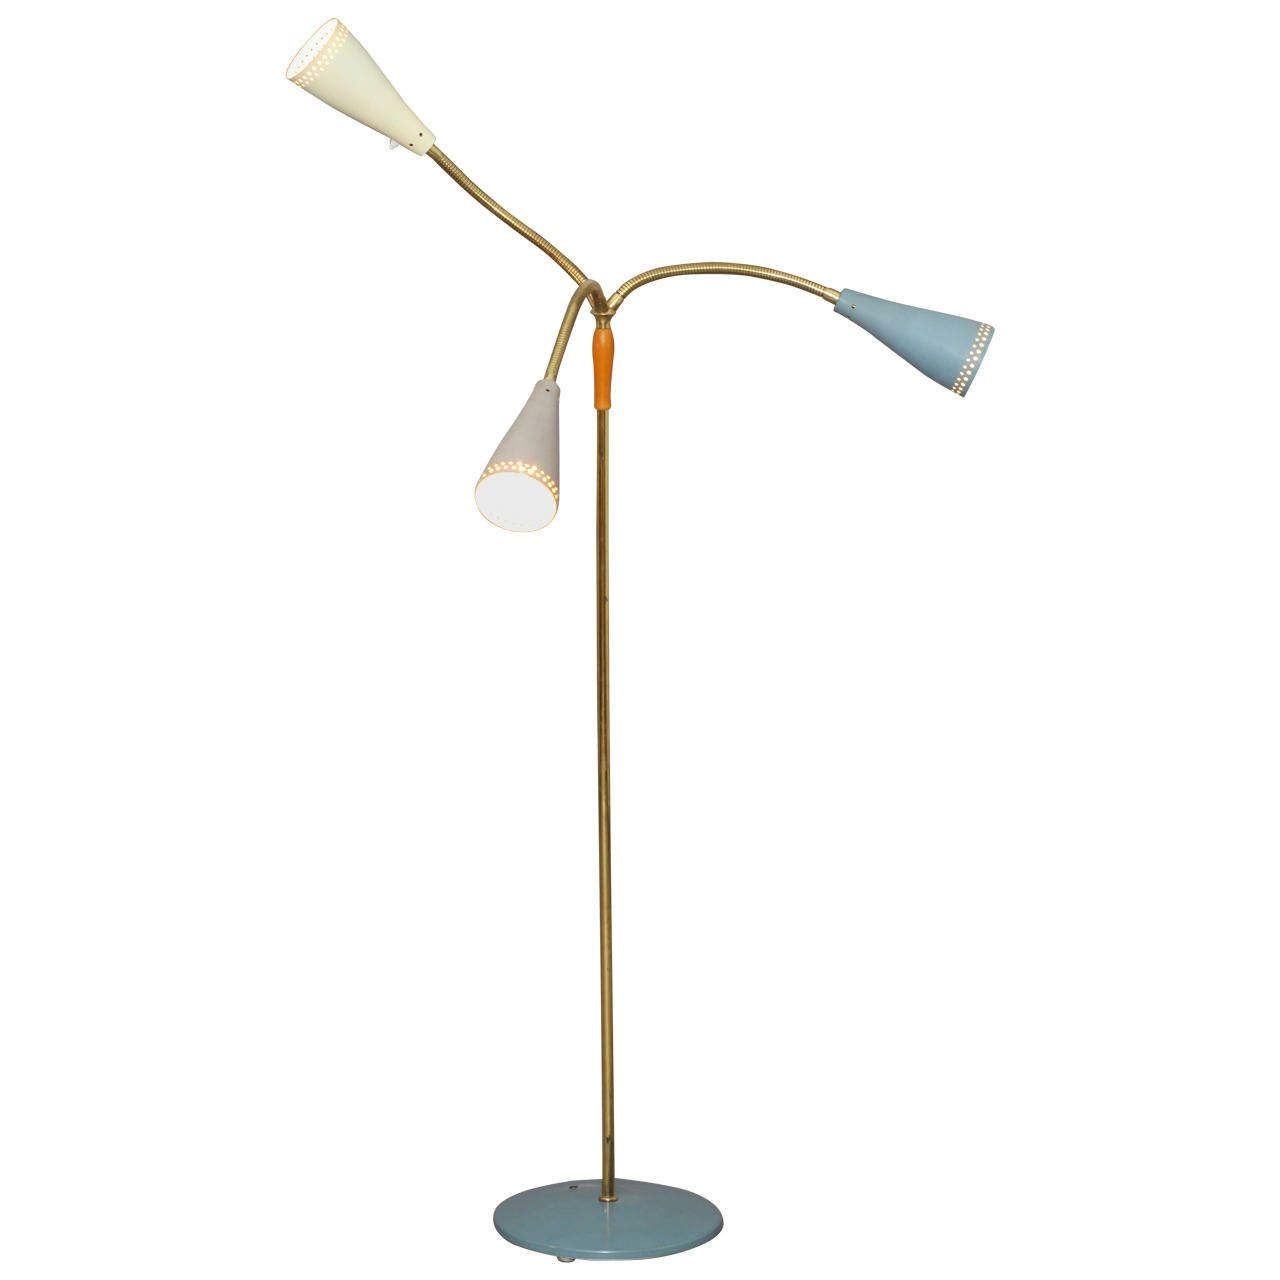 Amazing Floor Lamp With Three Flexible Arms Jt Kalmar pertaining to dimensions 1280 X 1280